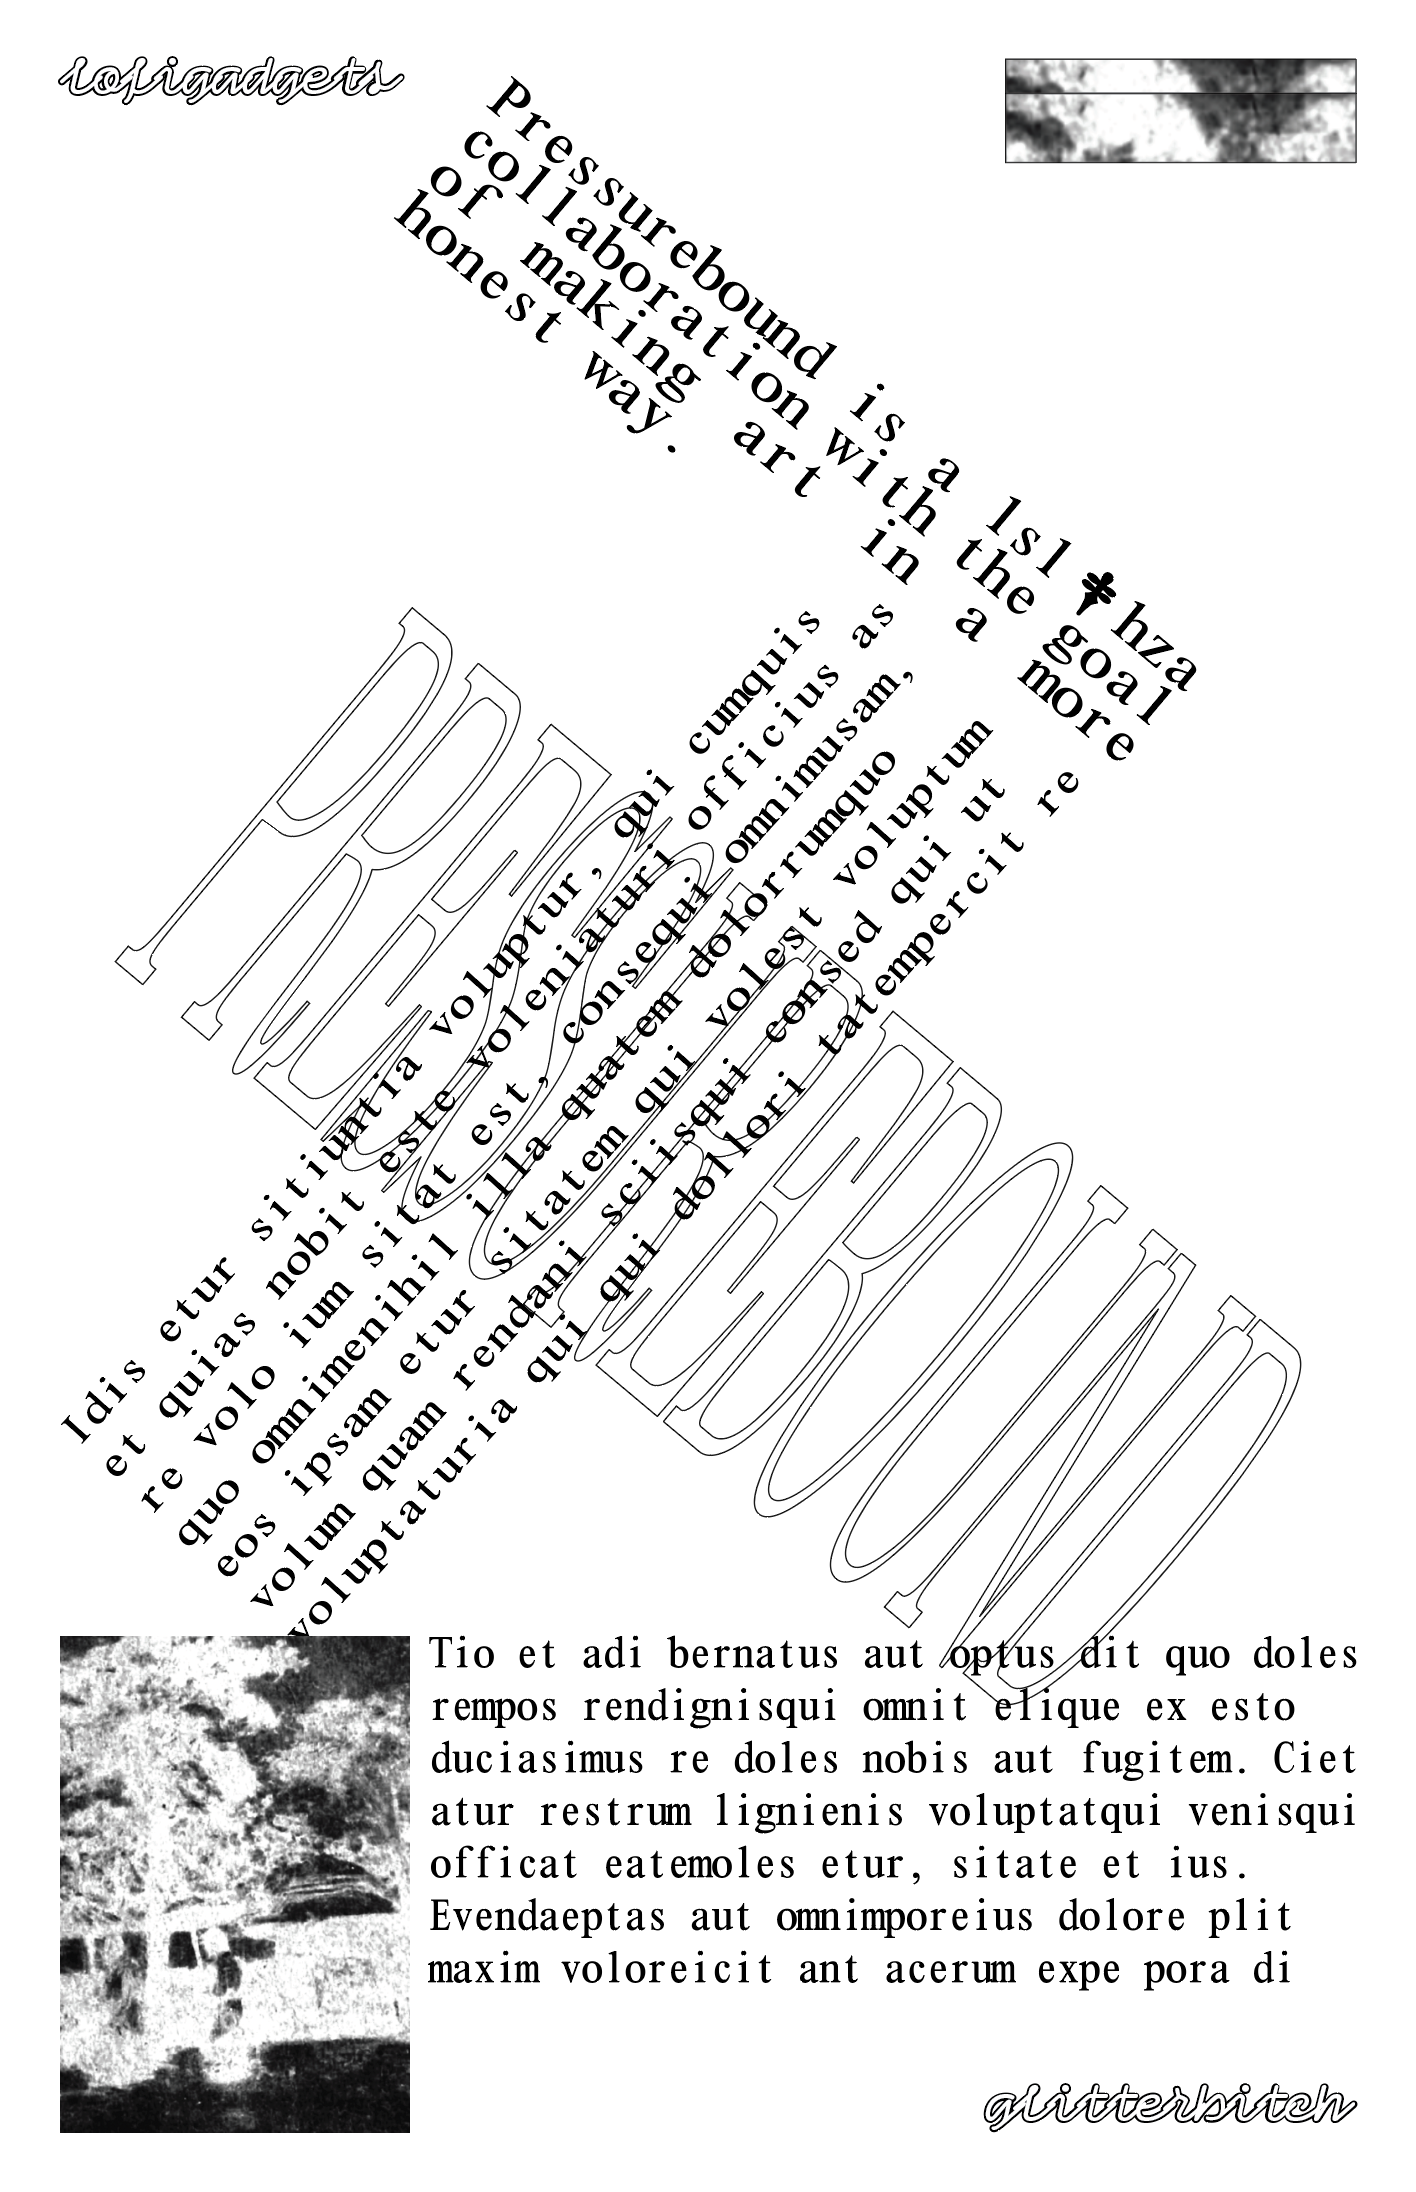 Screenshot of a draft of a poster, in black text/images on a white background. Two paragraphs of text sharply angled to form a 7-like diagonal composition, of which the uppermost paragraph reads 'Pressurebound is a lsl & hza collaboration with the goal of making art in a more honest way'. (The & is replaced with a dagger symbol.) The word 'PRESSUREBOUND' stretched tall and narrow in a black outline (with no fill) in the background. At the top and bottom of the composition are snippets of an unidentifiable image and some filler text.